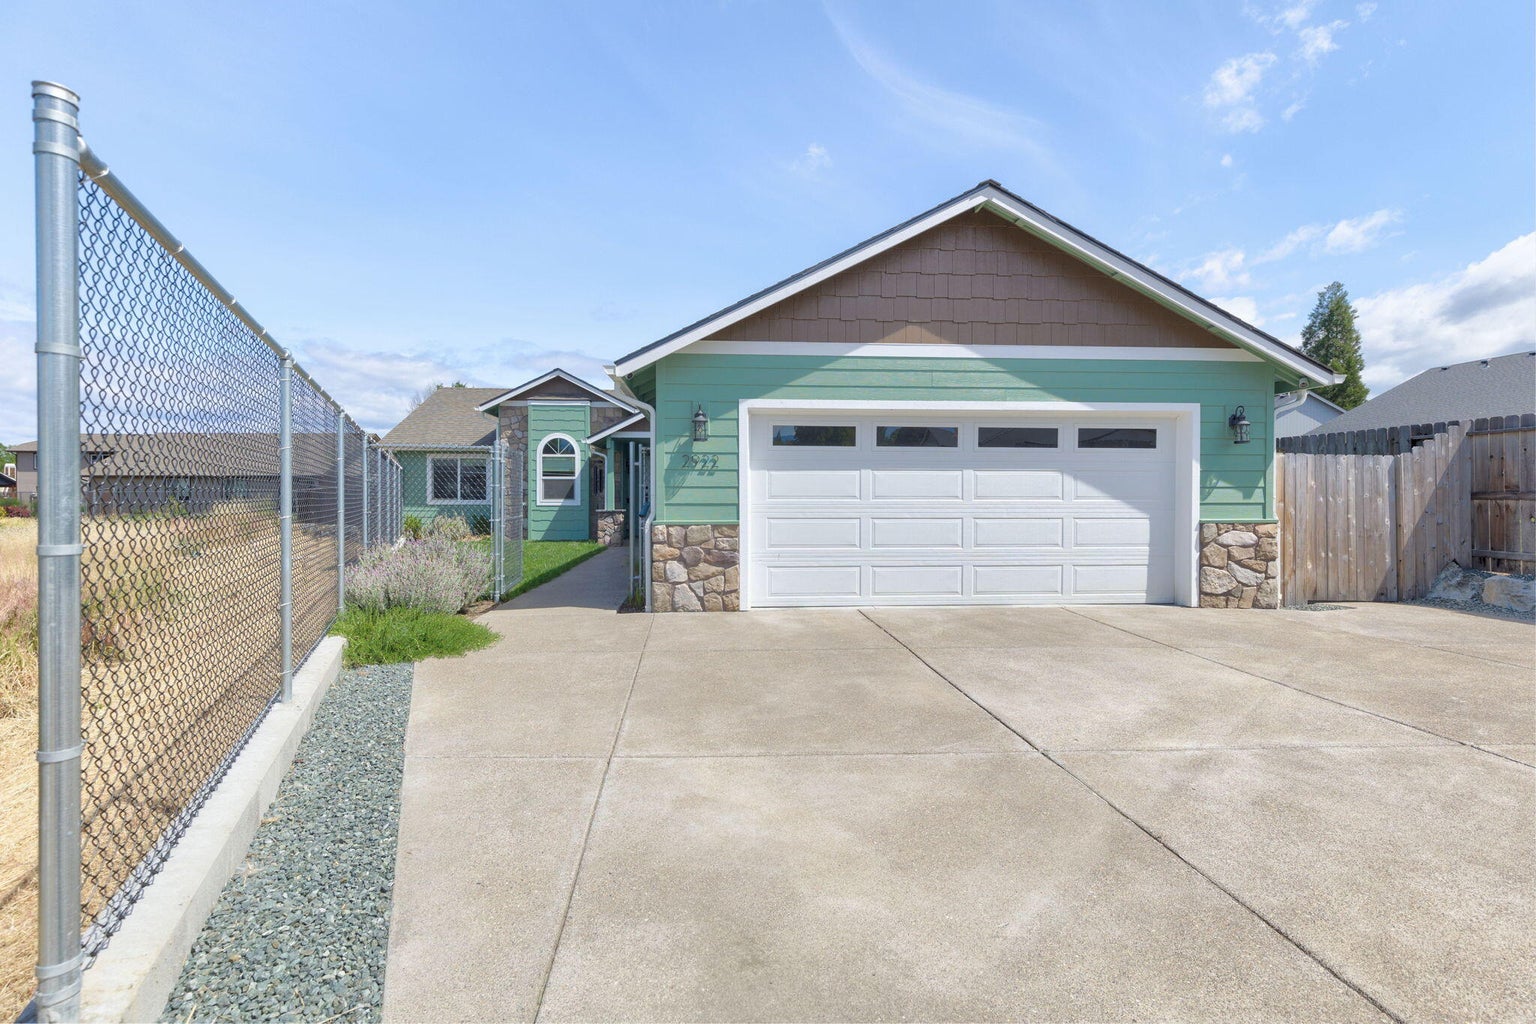 220183659, 2922 Naples Drive, Grants Pass, OR 97527